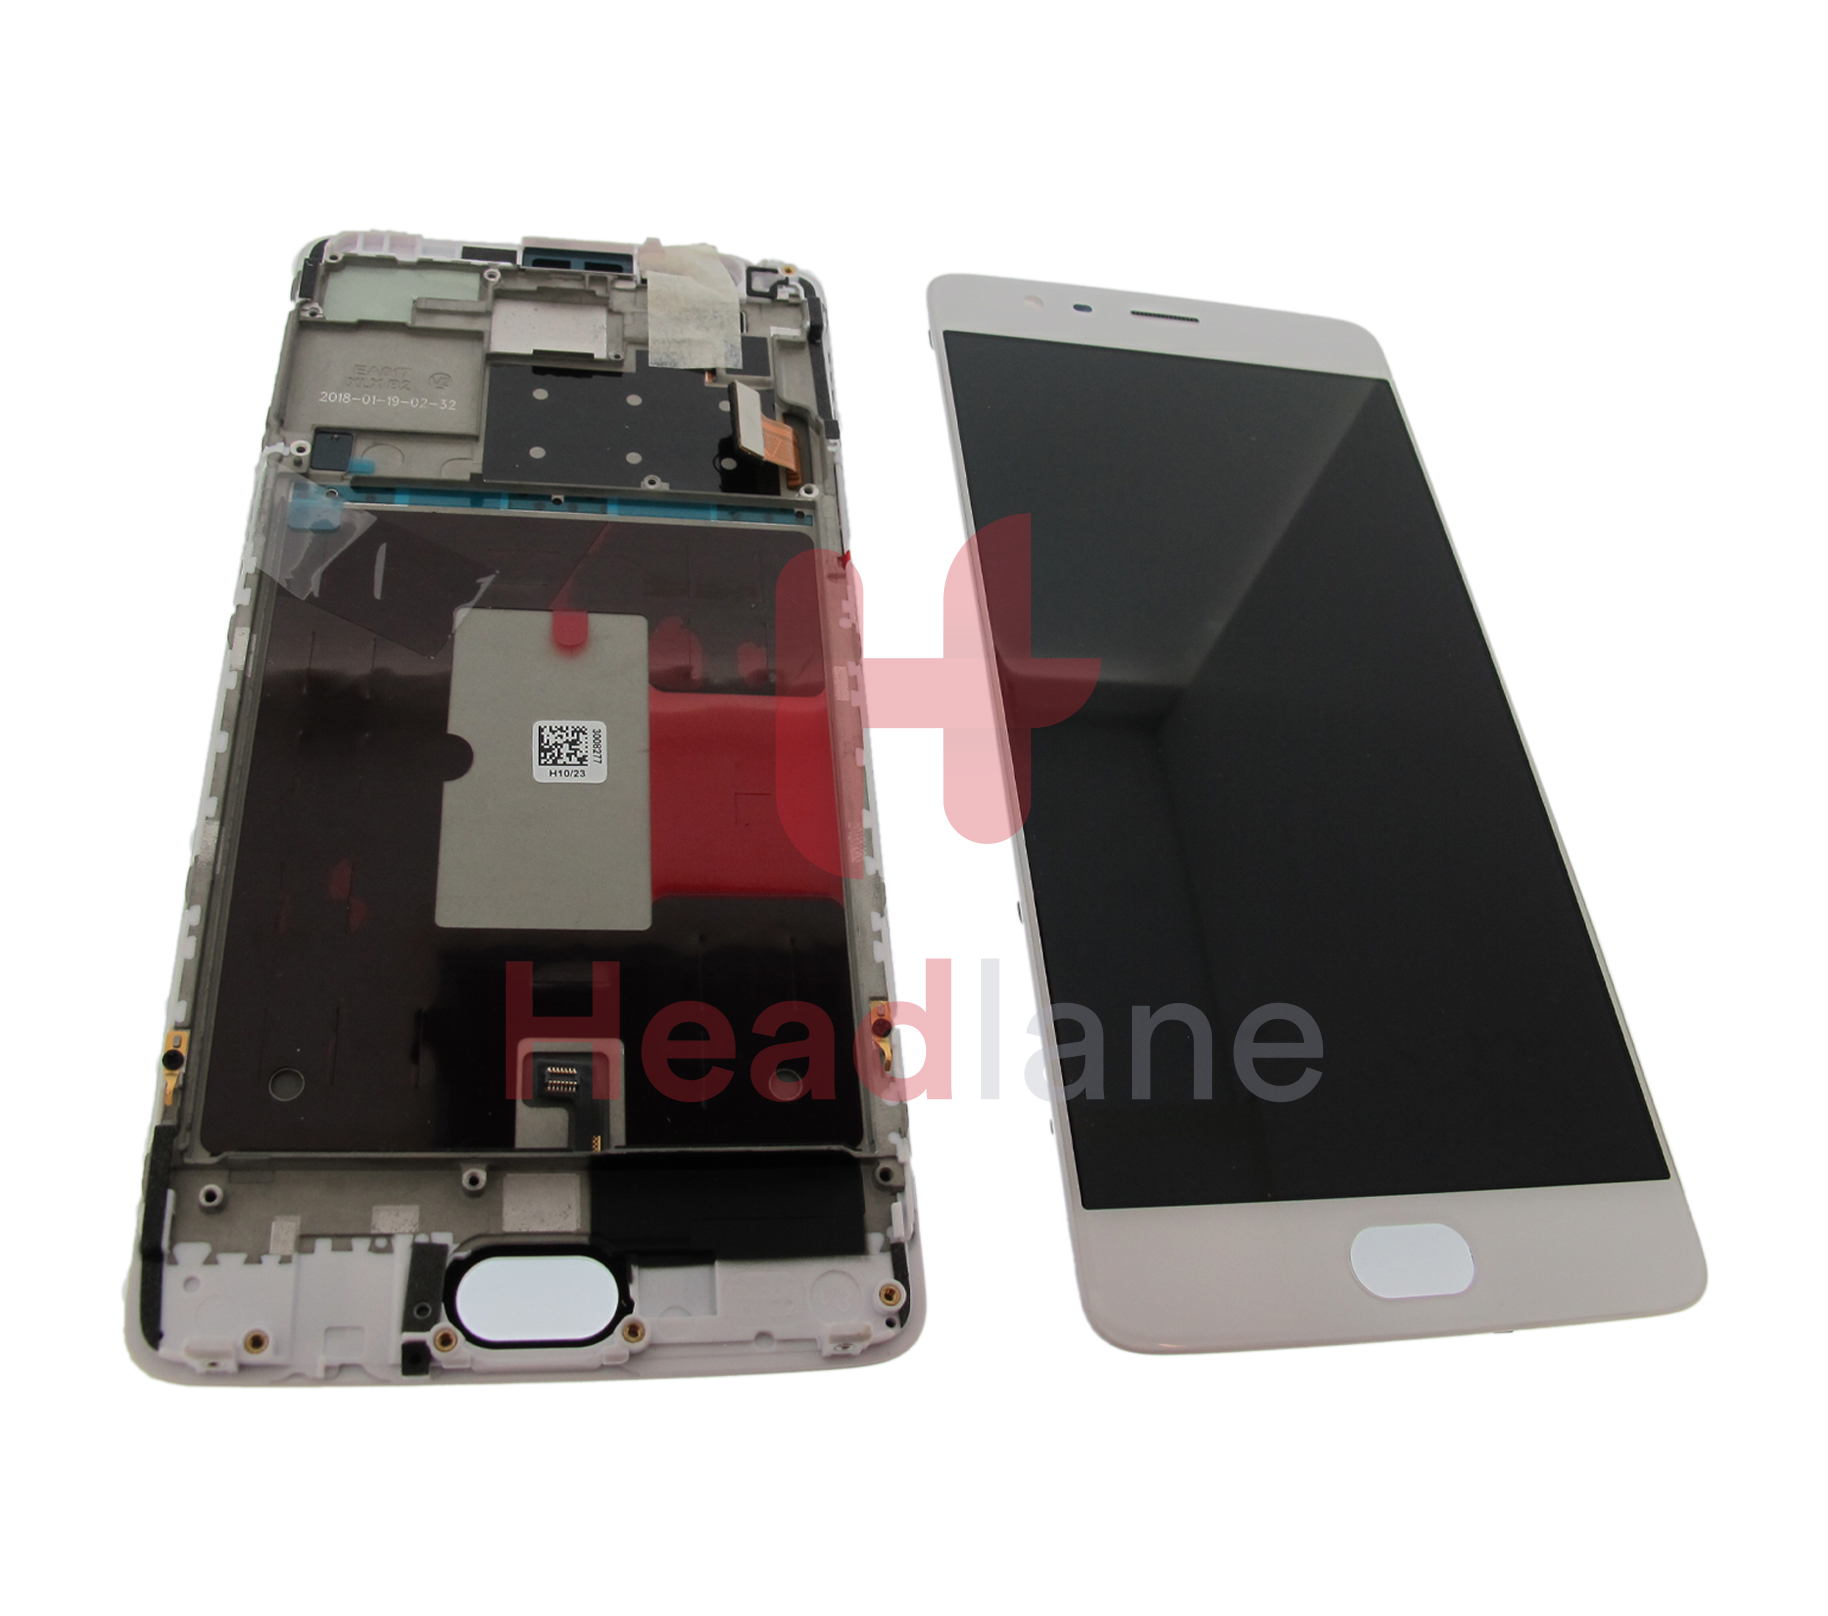  OnePlus 3 / 3T LCD Display / Screen + Touch - White